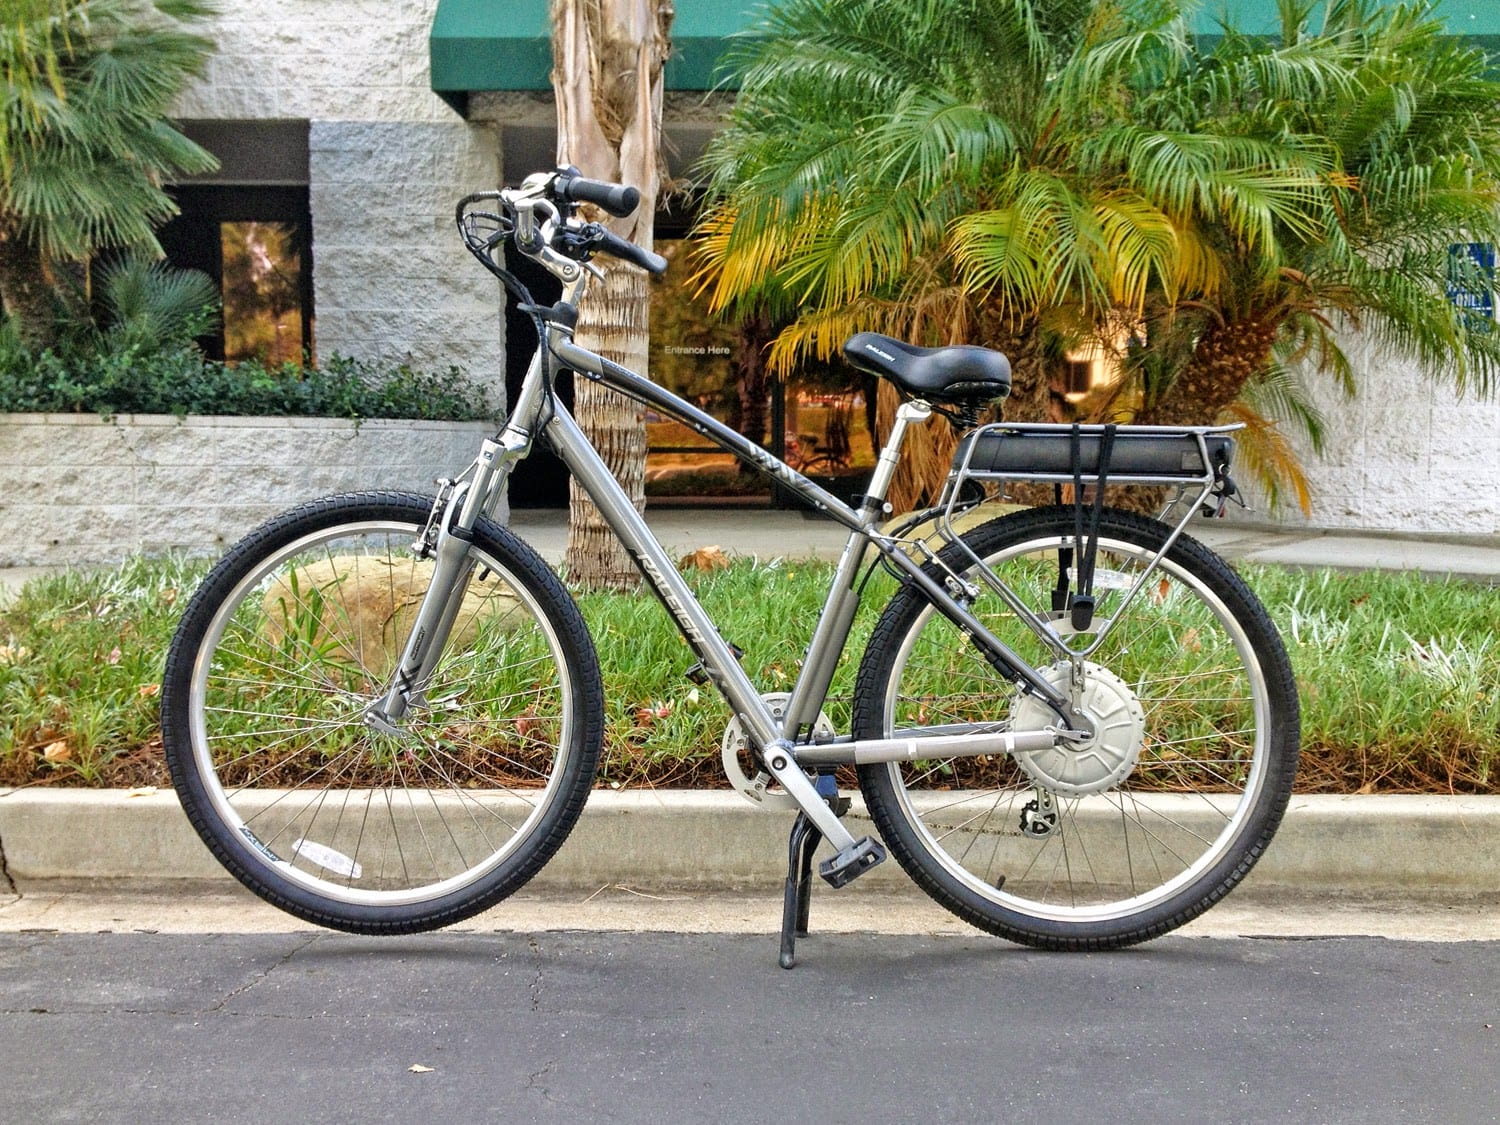 2015 Raleigh Venture iE Review | ElectricBikeReview.com